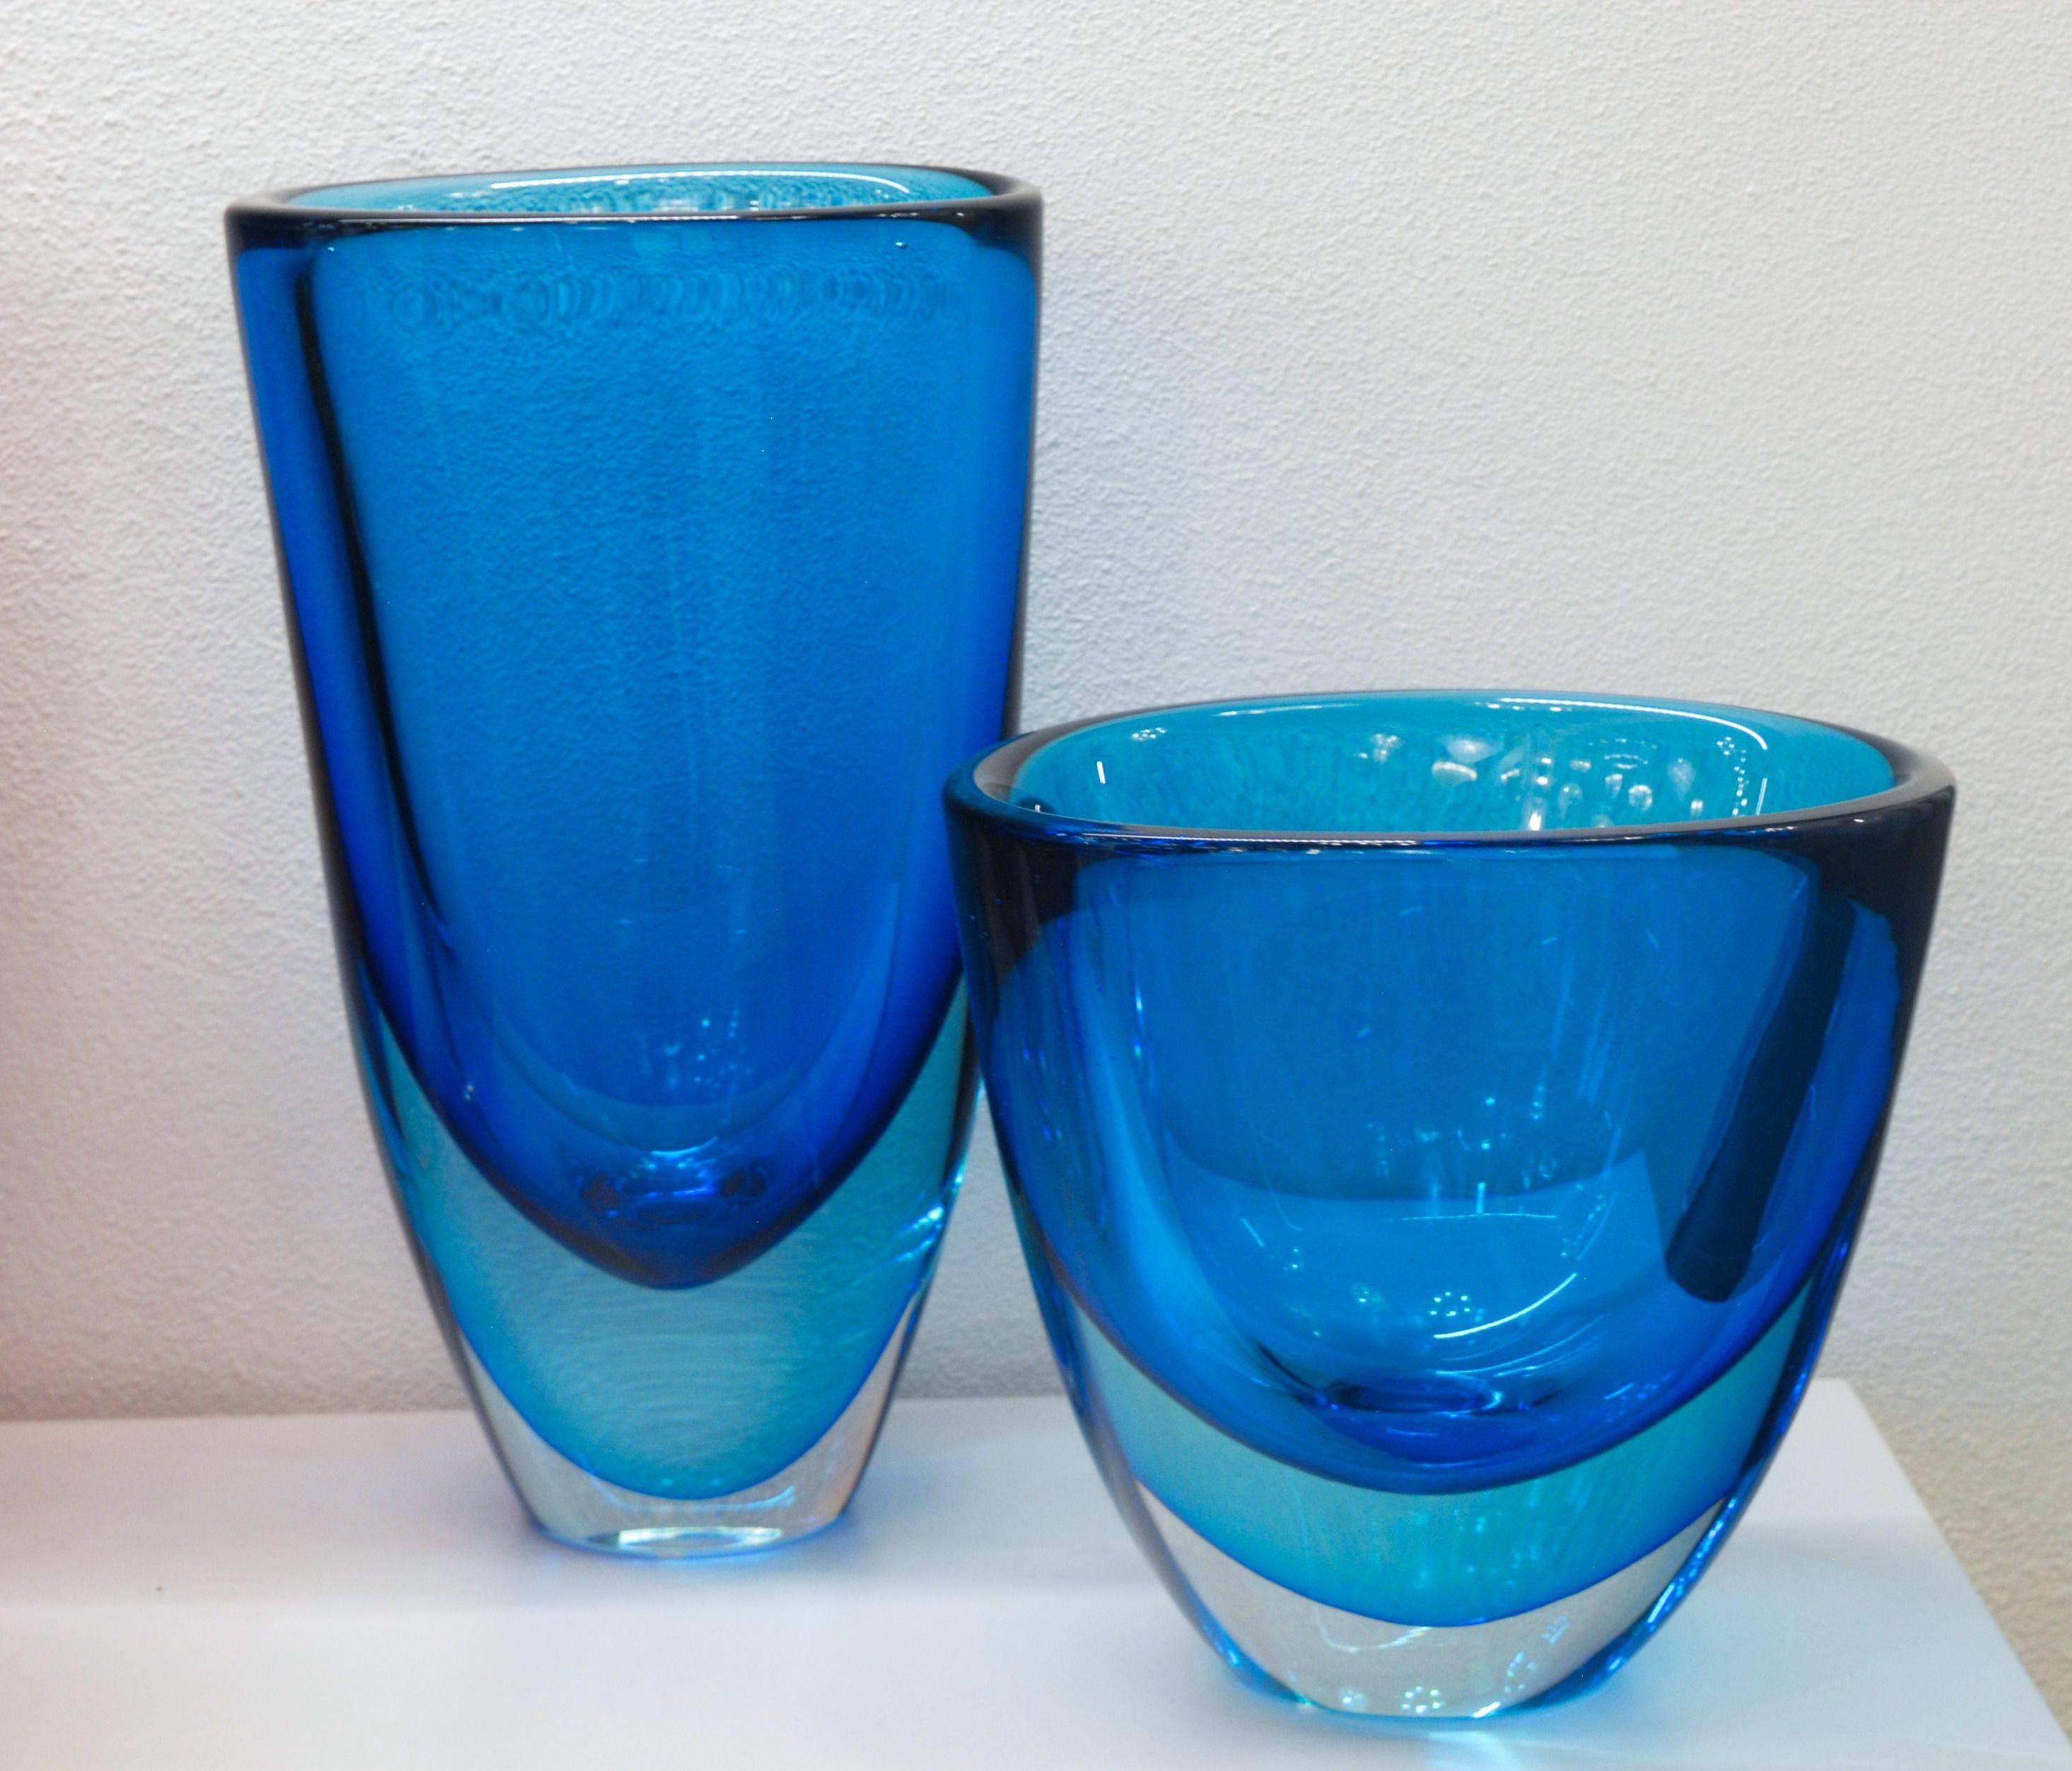 Stefano Toso Pair of Sommerso Acquamare and Cobalt Vases, Massiccio with Sbruffi 2